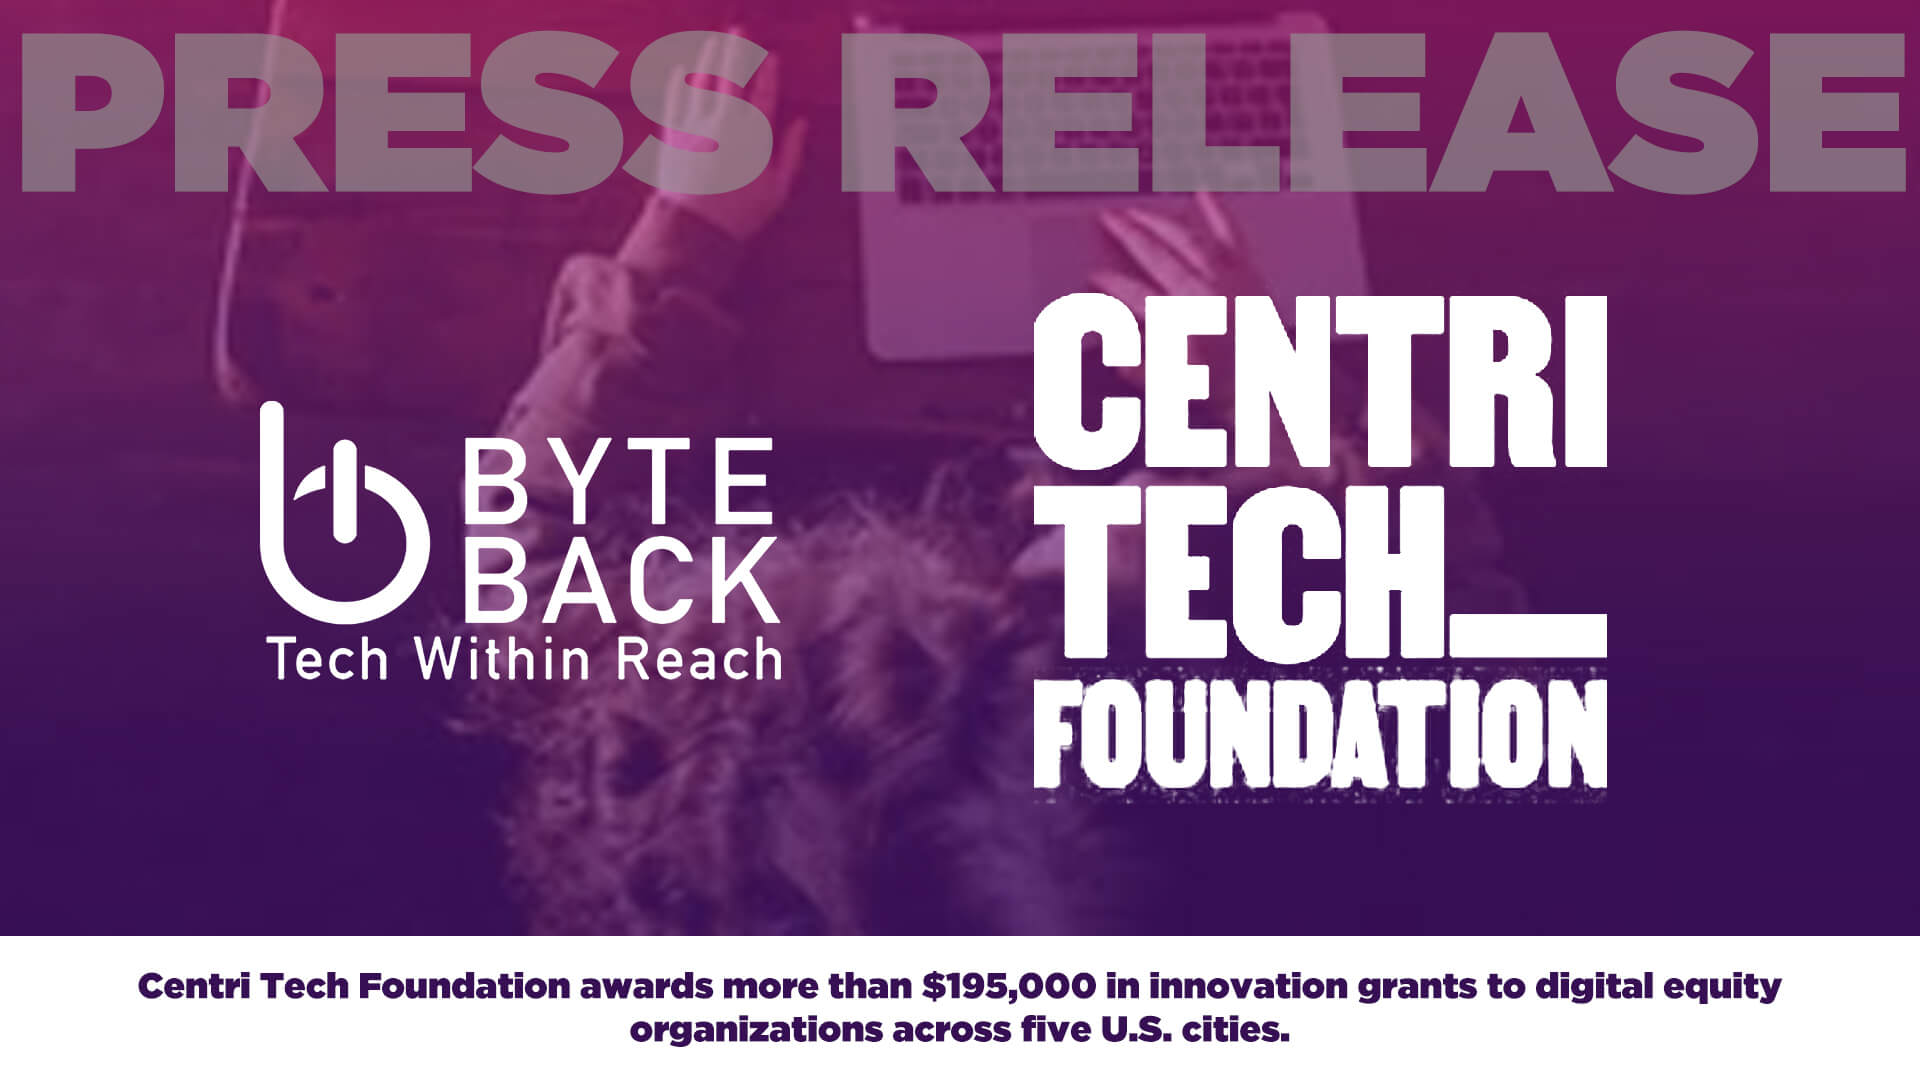 Byte Back awarded Centri Tech Foundation Grant to aid in bridging the digital divide